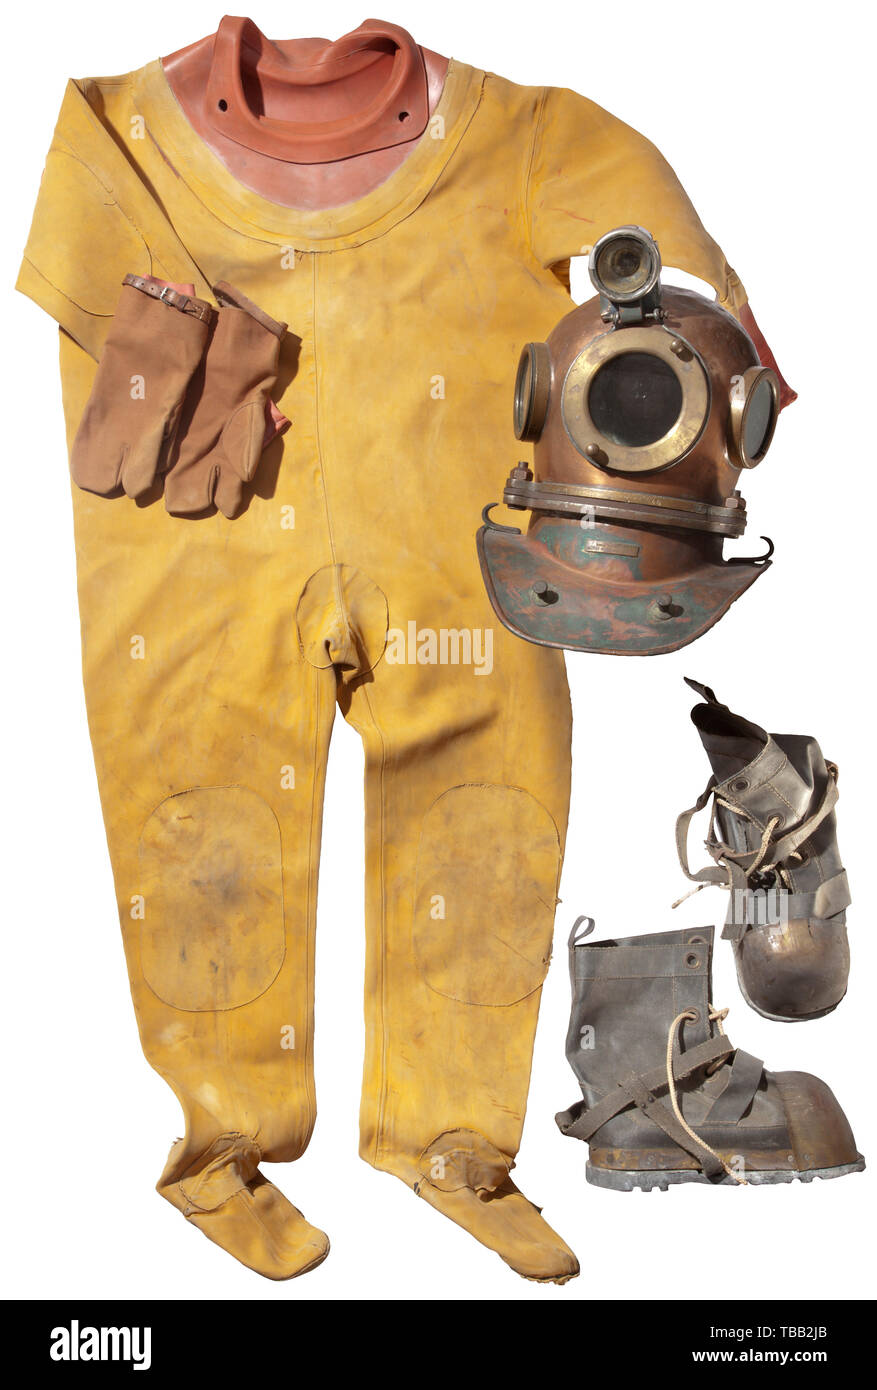 A Russian diving suit Helmet dated 1946. Copper diving helmet with screw-mounted three bolt-system, three brass helmet windows and mounted diving lamp. Helmet and collar with different numbers, the helmet stamped with the date '1946'. Diving suit of rubberised fabric with gloves, the weighted shoes with lead sole and lace fastening. Top of the helmet slightly dented. Height of helmet with collar and lamp 52 cm. historic, historical, 20th century, Additional-Rights-Clearance-Info-Not-Available Stock Photo